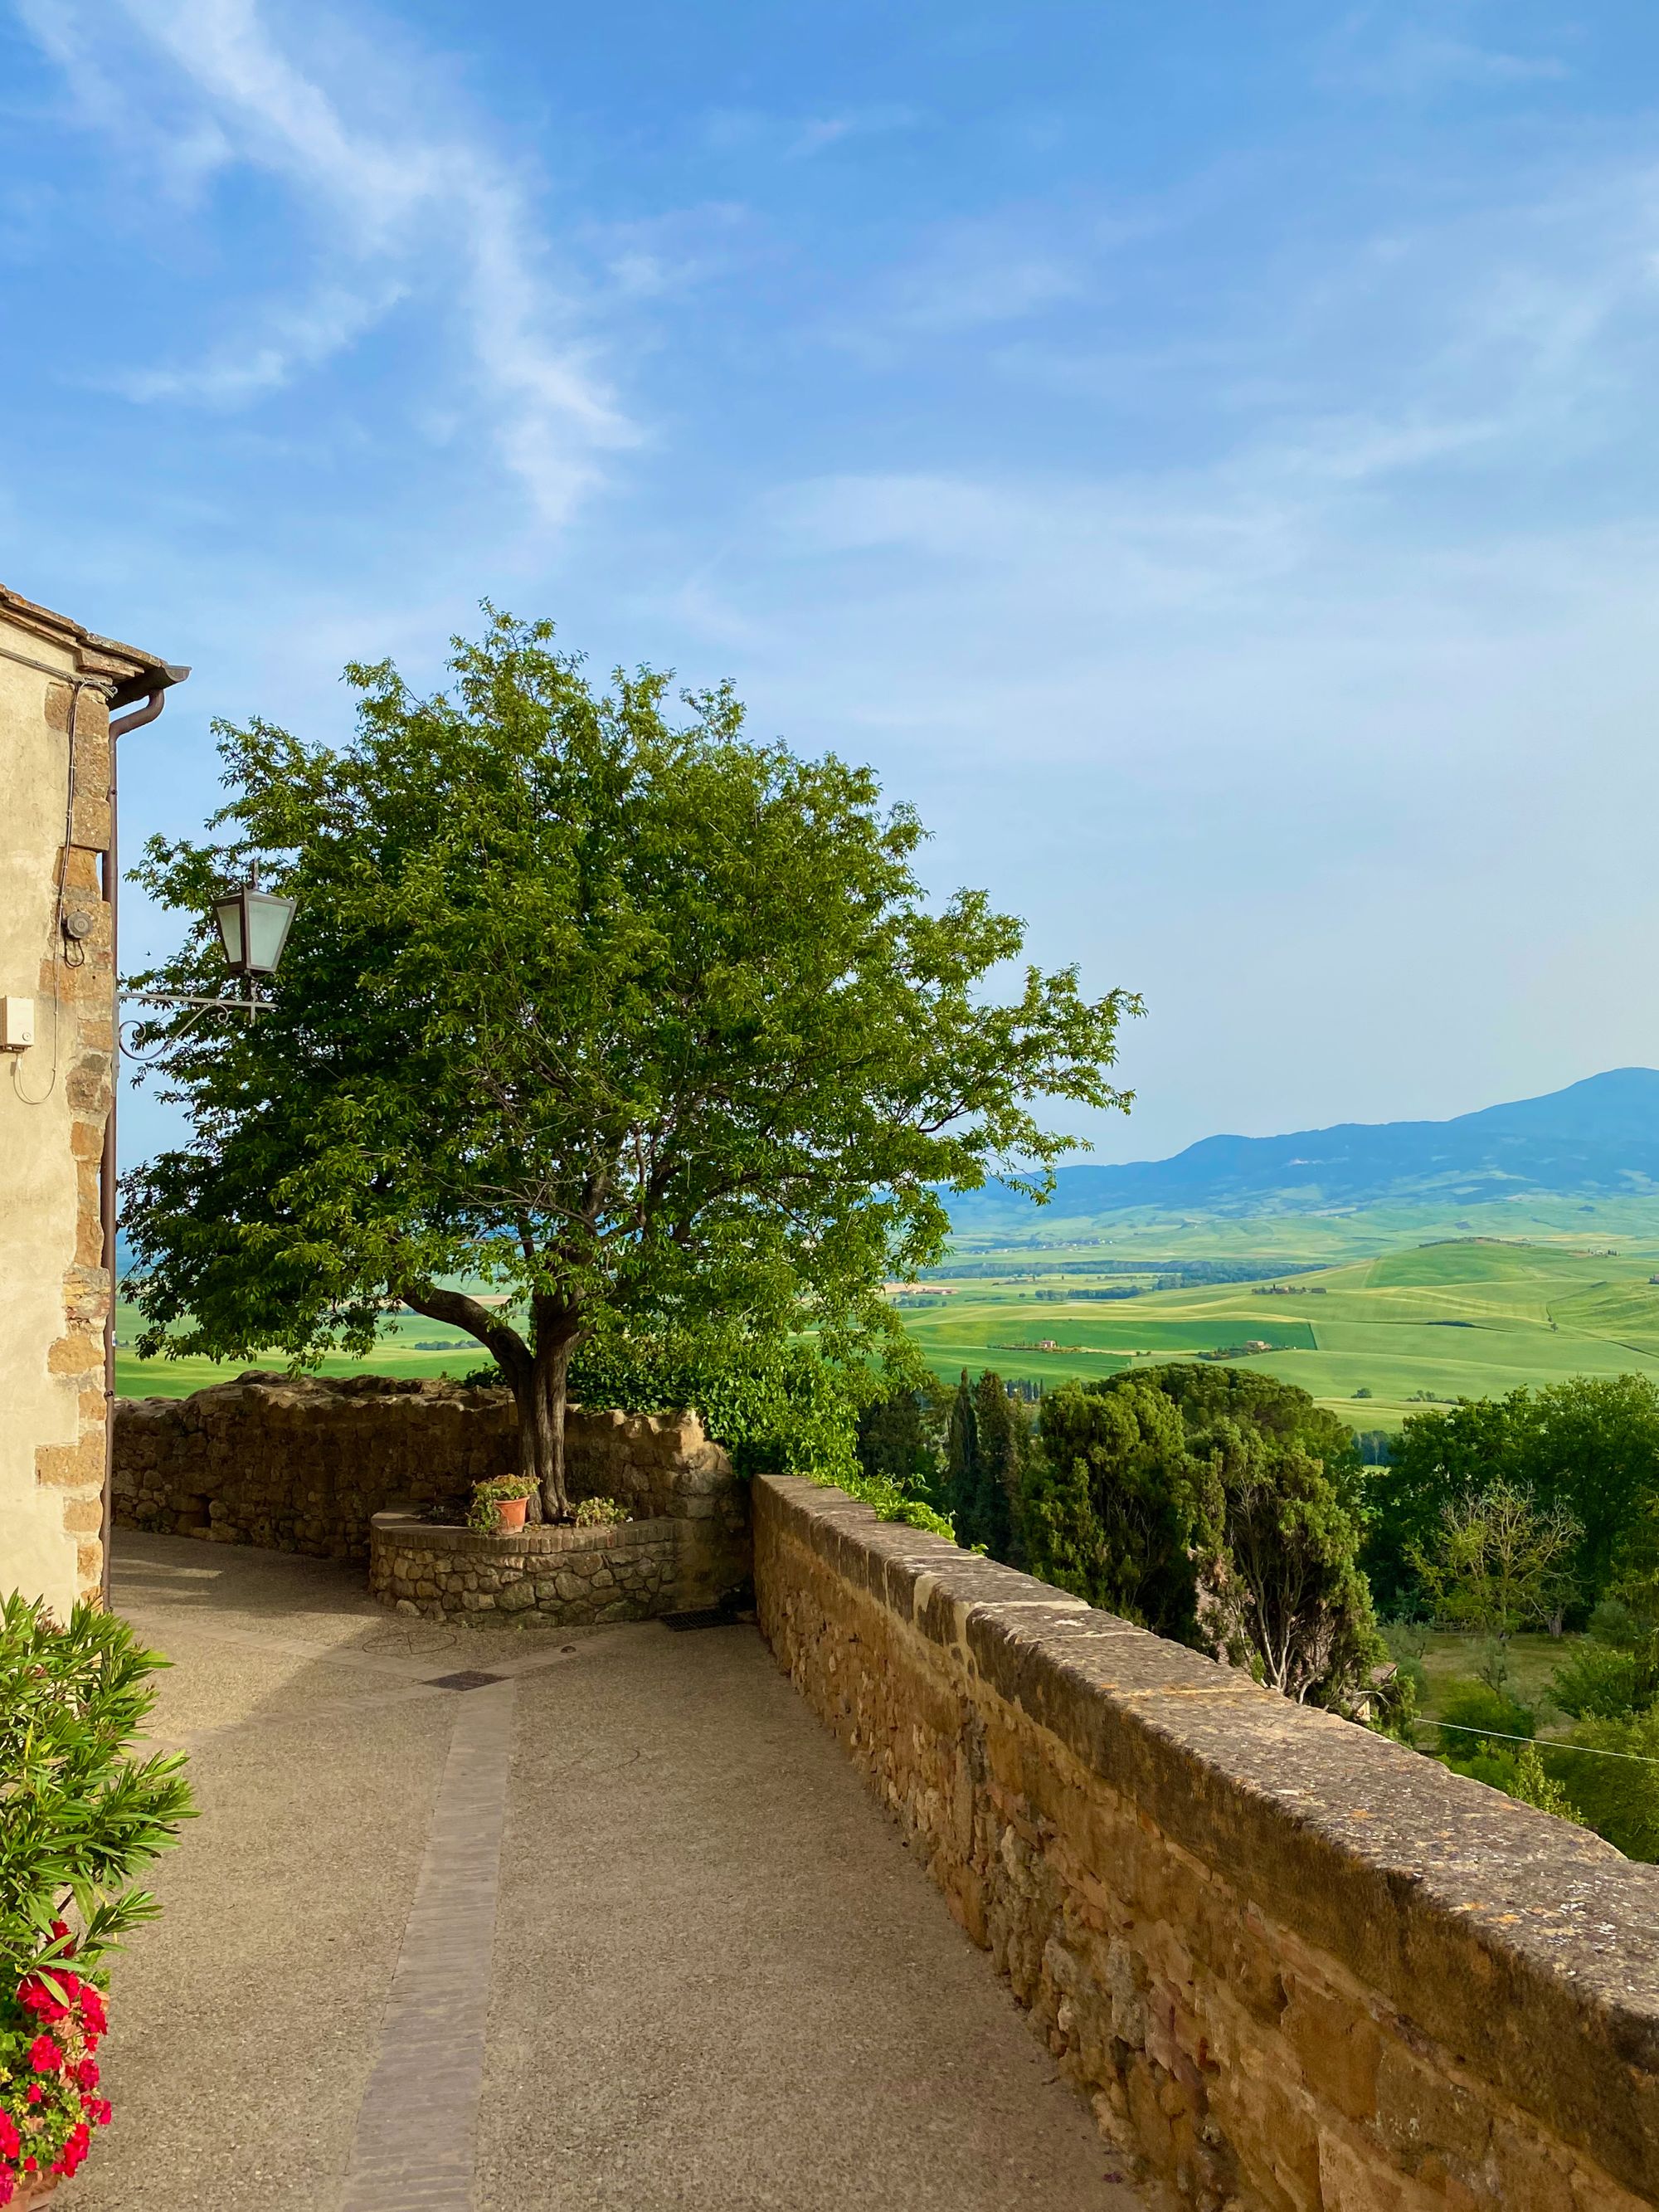 The first road trip part 02: our itinerary in Tuscany while working remote